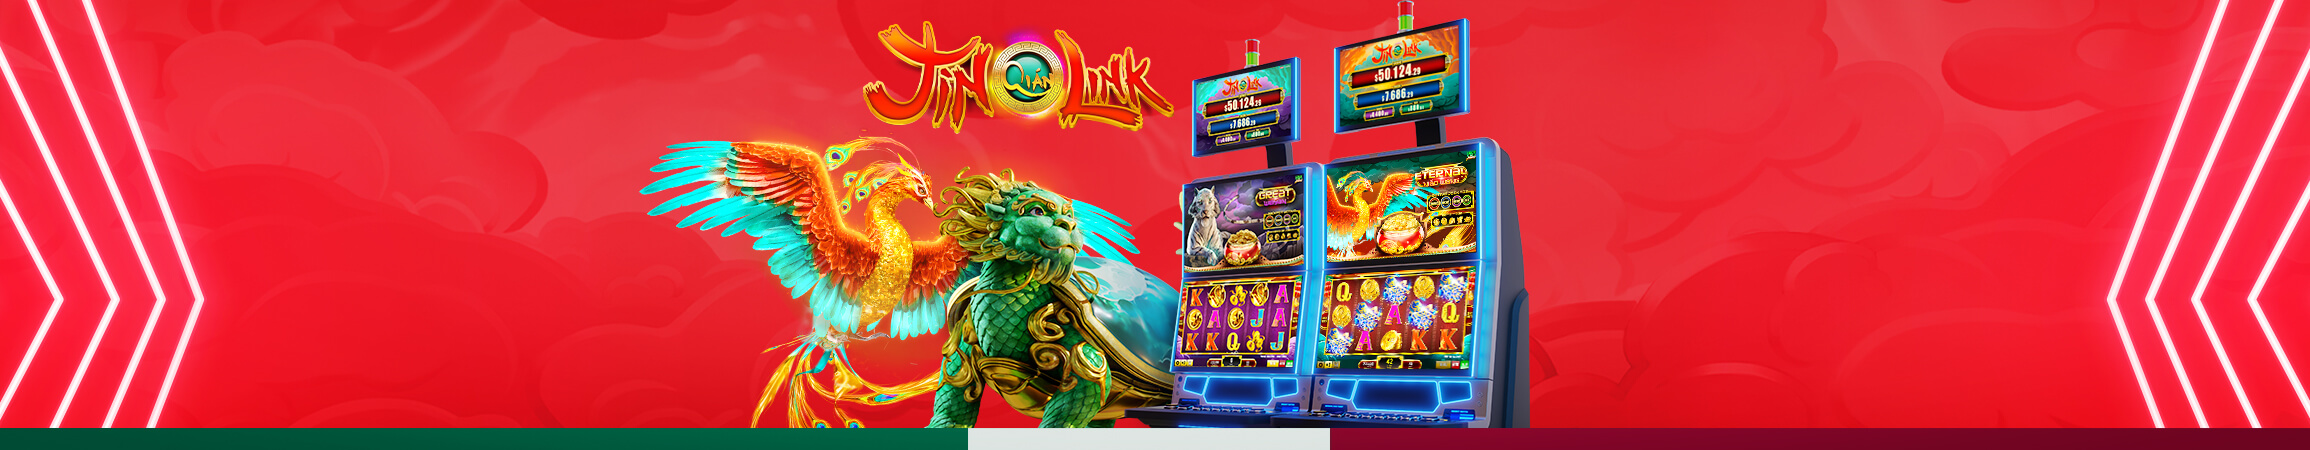 Jin Qián Link expands to over 40 casino rooms across Mexico making slot fans go wild